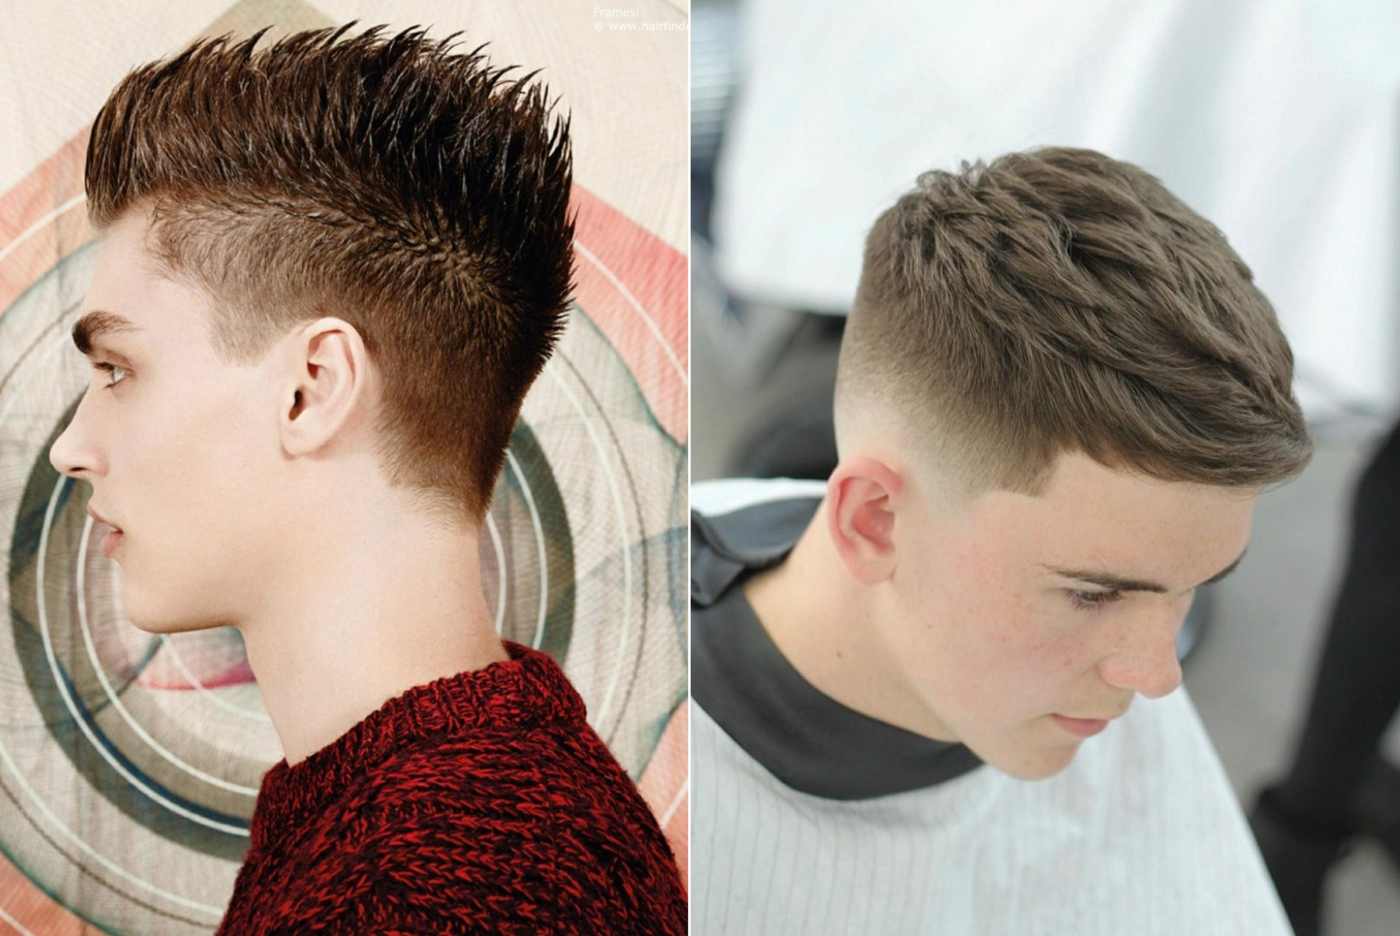 90s hair styling modern interpret for an embarrassing look at boys